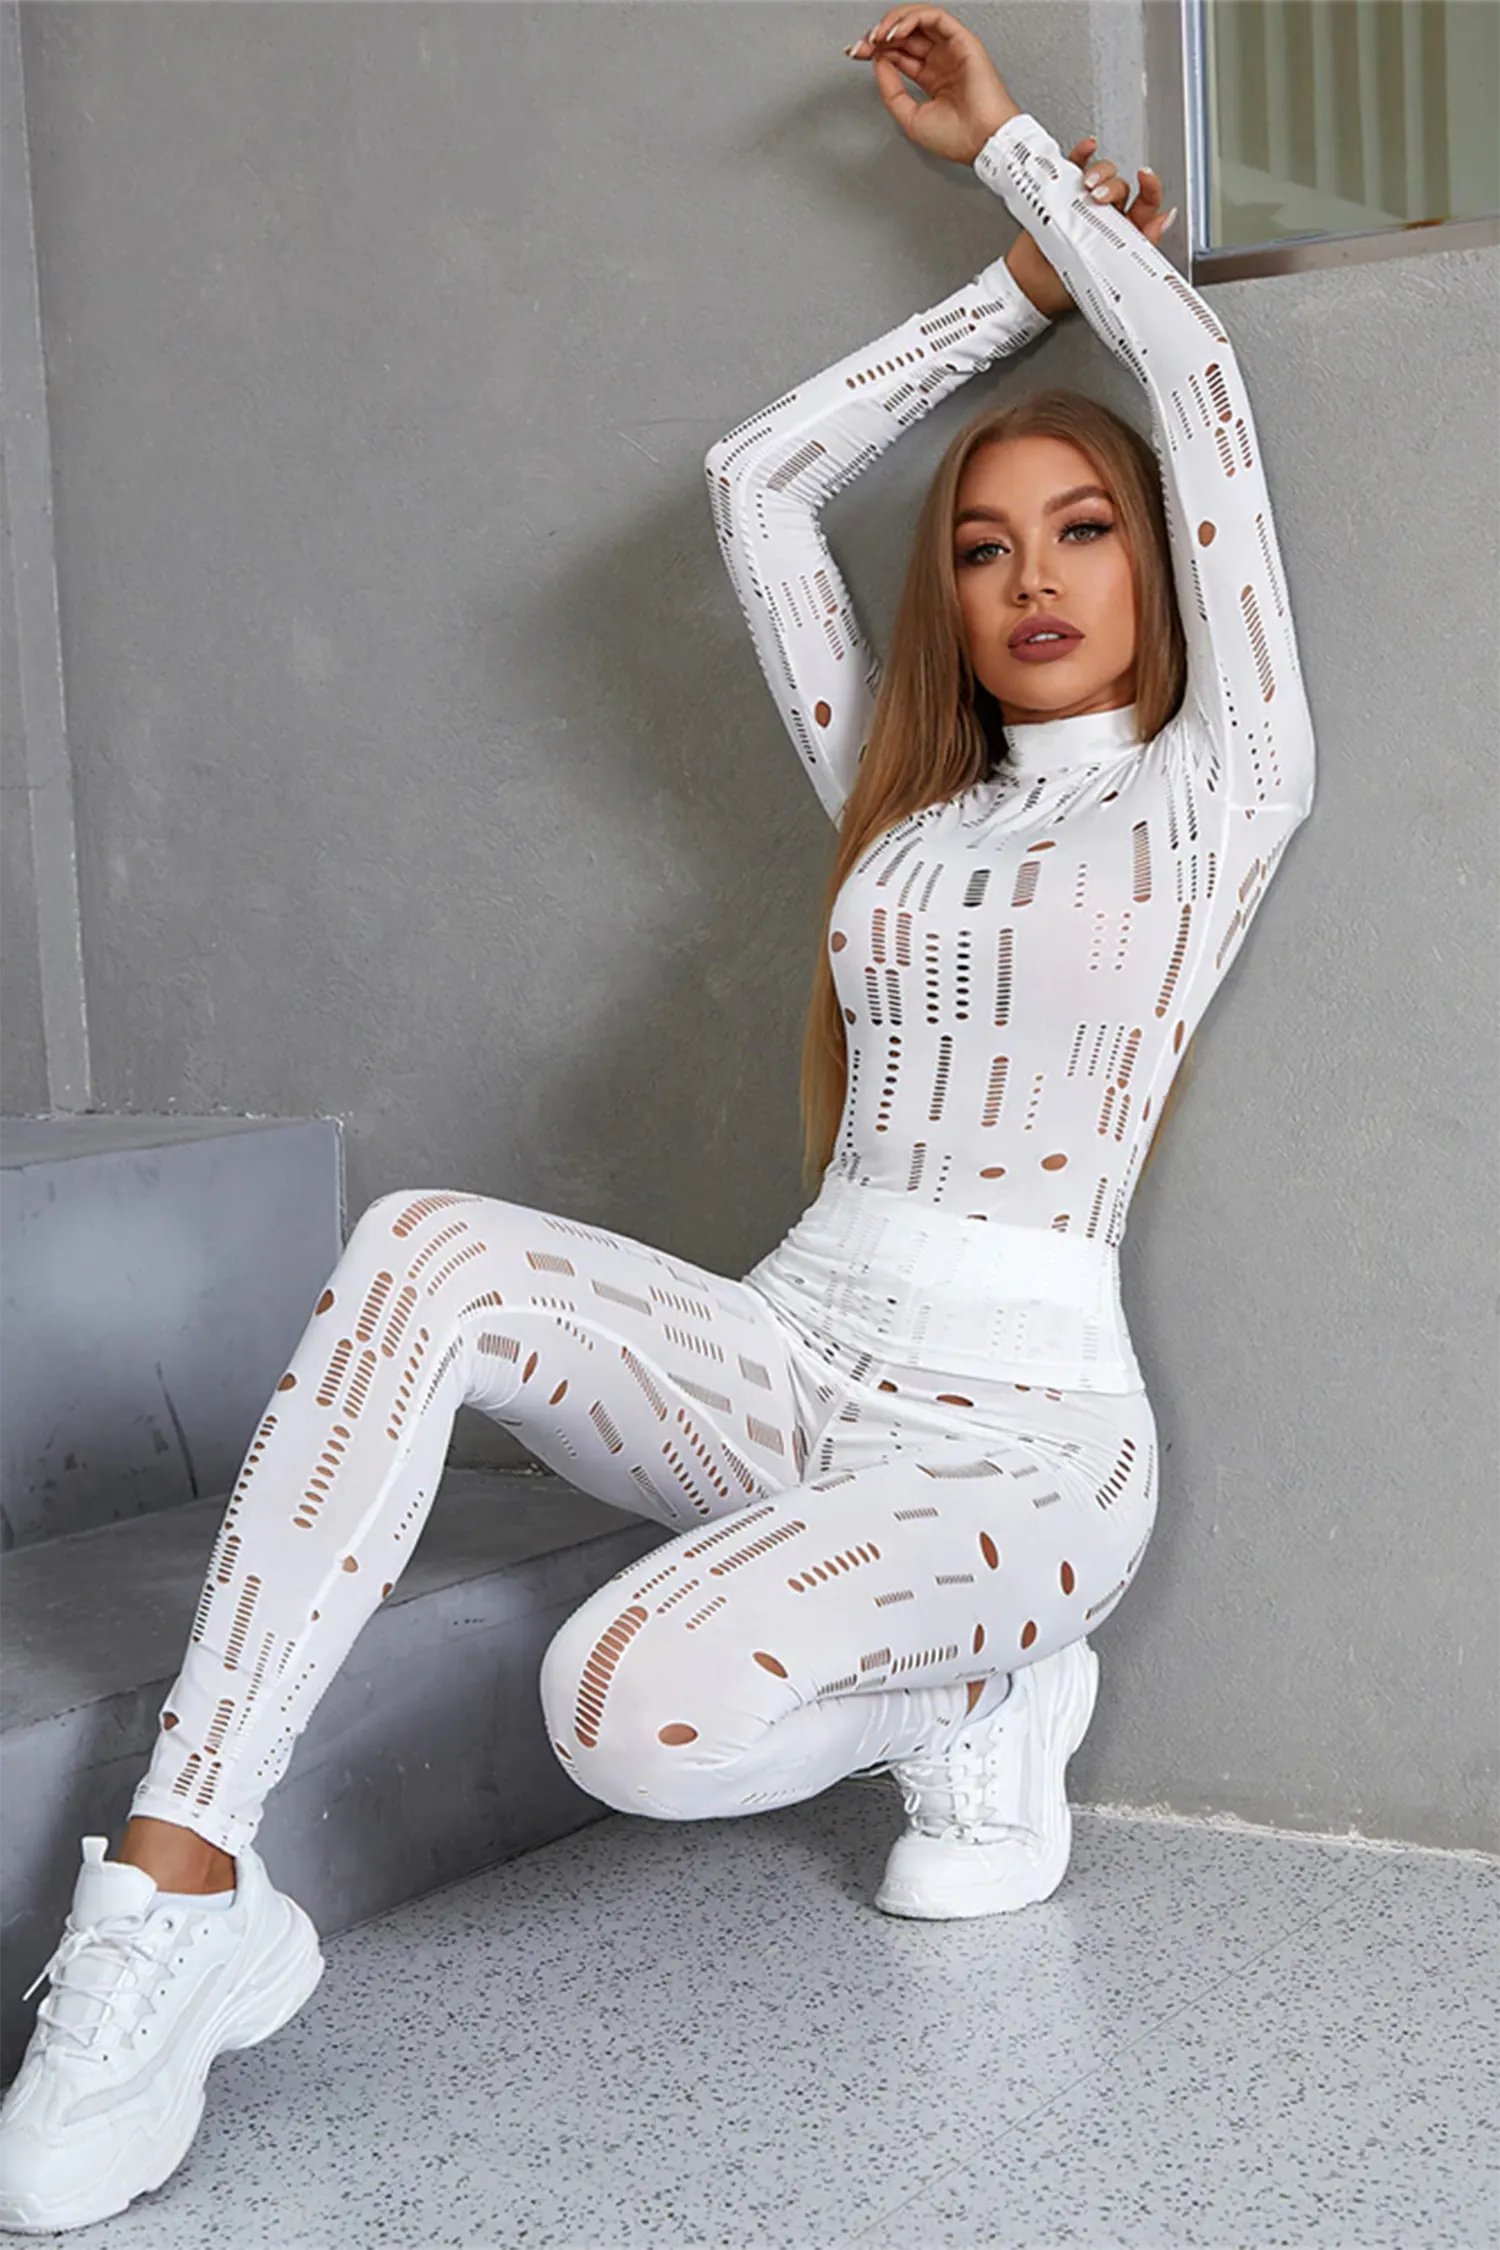 White Long Sleeve Cut Out Top & Ripped Leggings Set - White / S